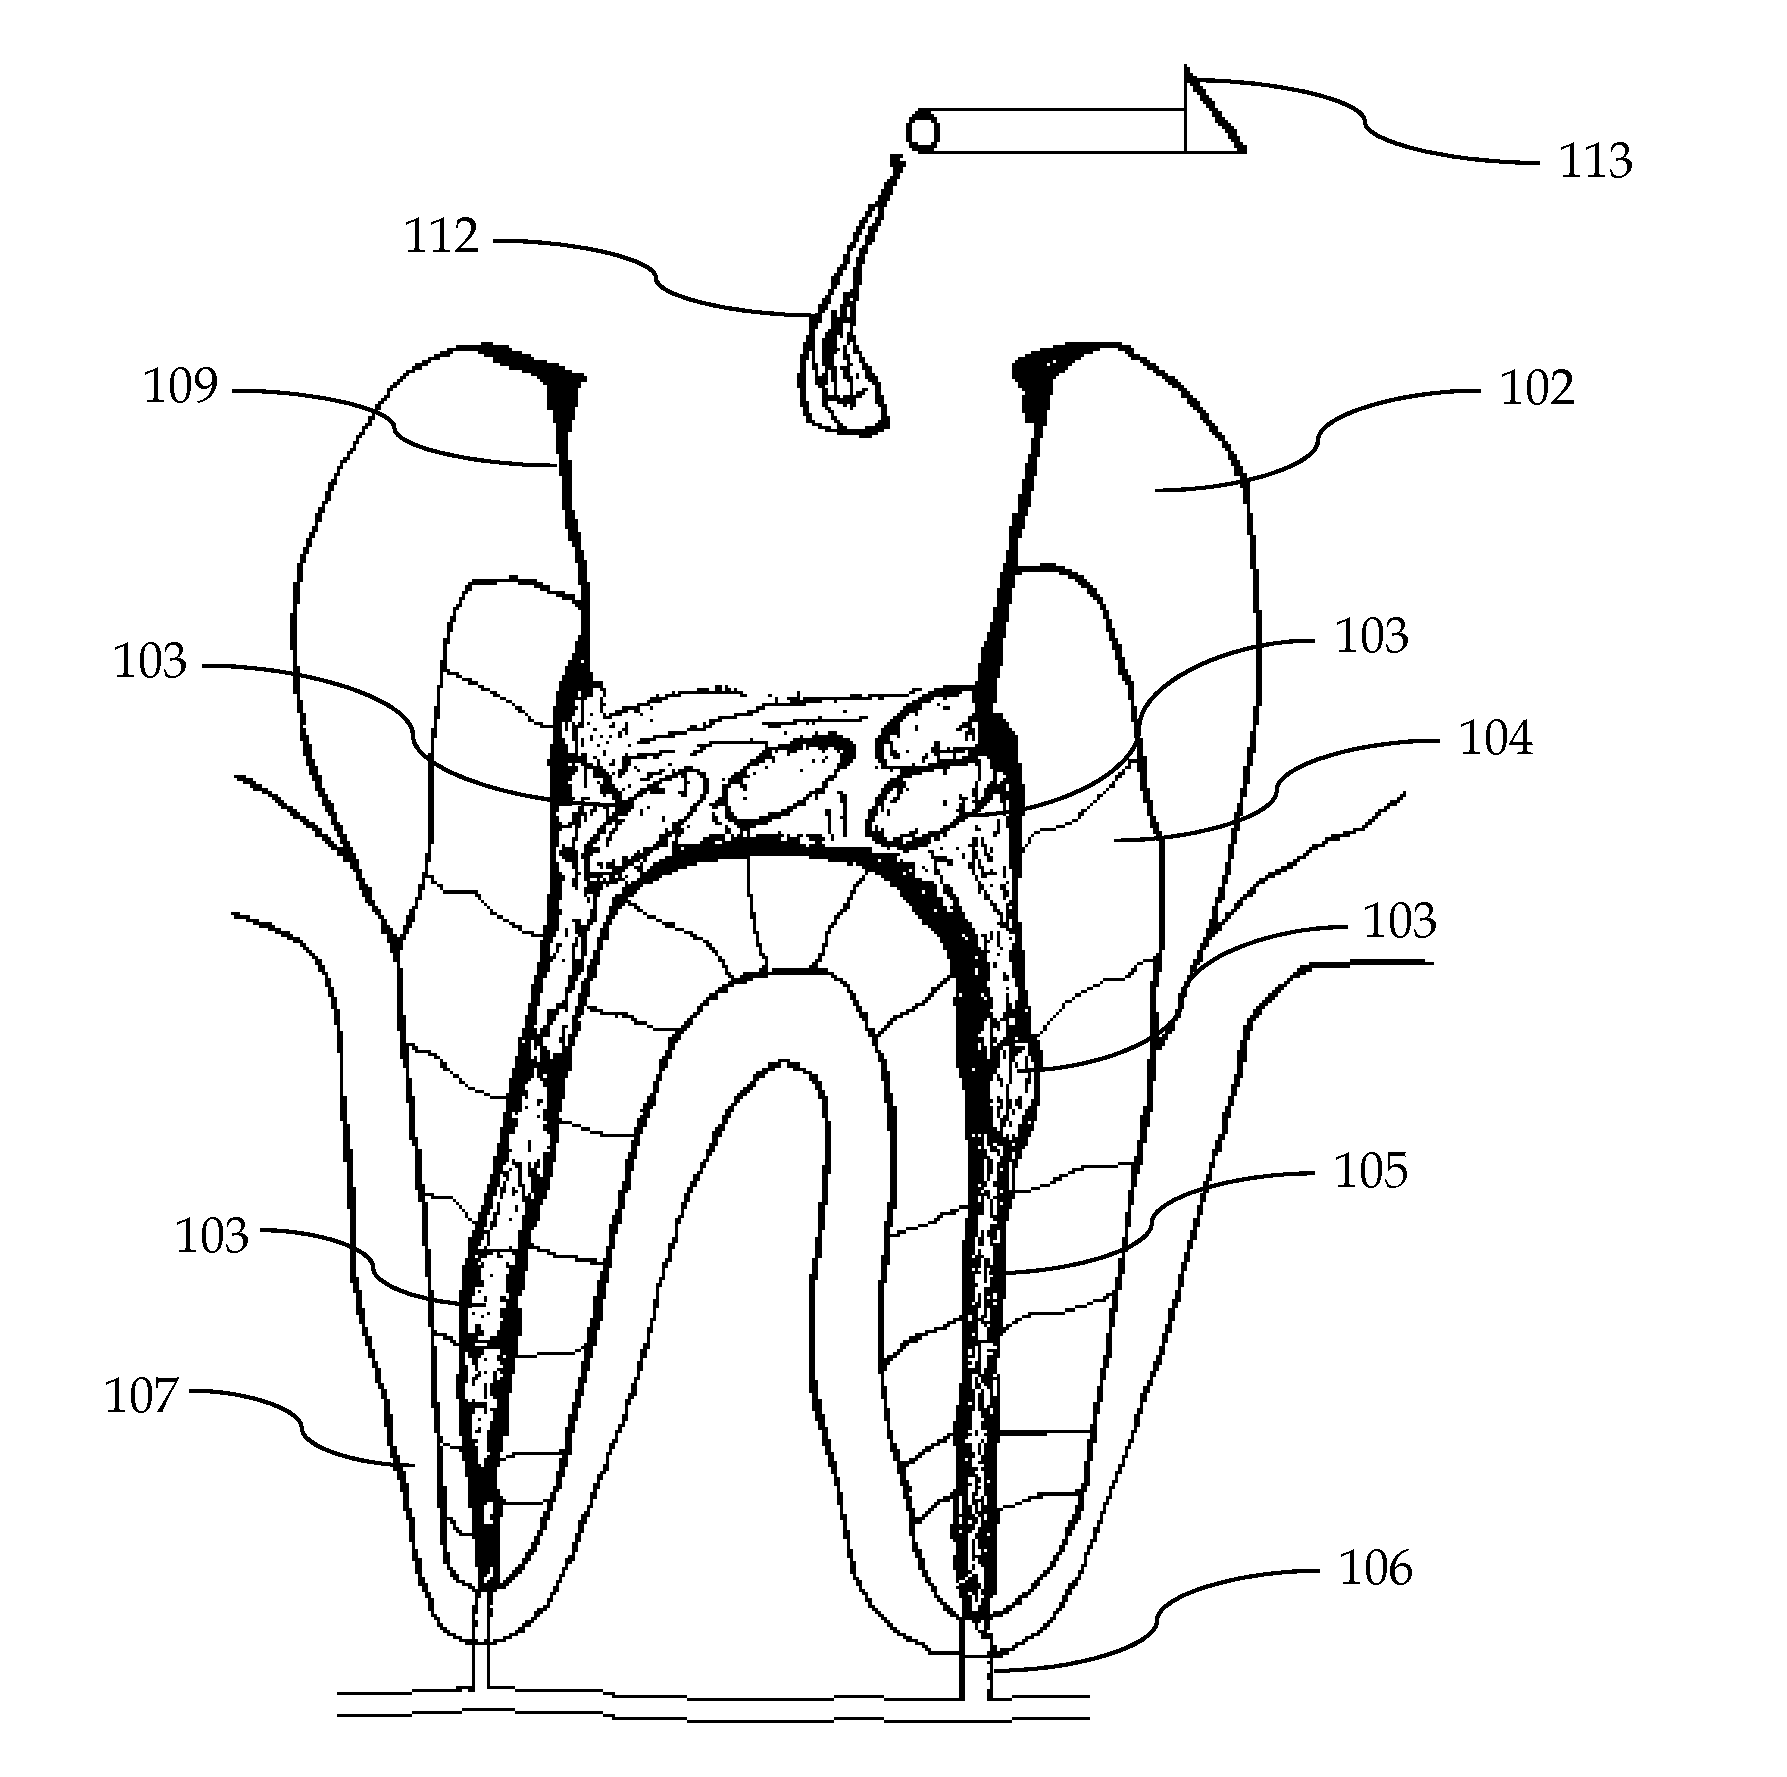 Composition and method of using medicament for endodontic irrigation, stem cell preparations and tissue regeneration